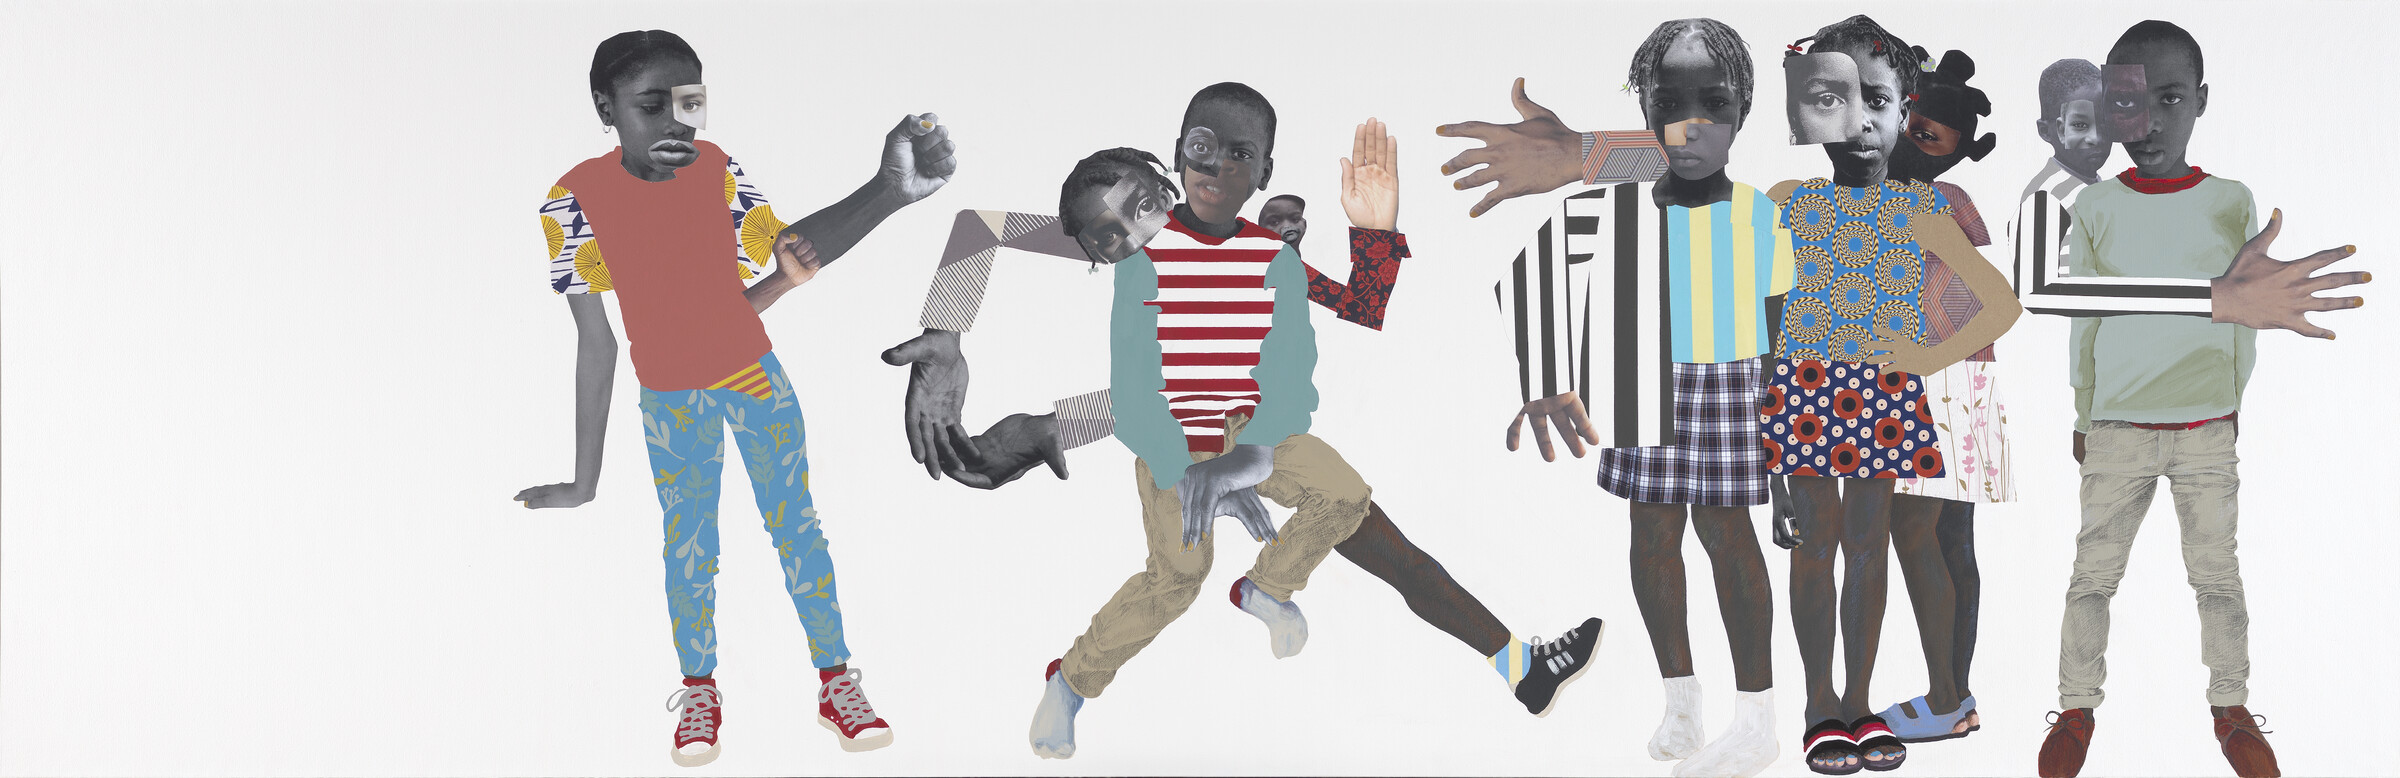 Deborah Roberts, Let Them Be Children, 2018, mixed media and collage on canvas, Virginia Museum of Fine Arts, Richmond, Arthur and Margaret Glasgow Endowment, courtesy of the artist and Stephen Friedman Gallery. Photograph: Sydney Collins © Virginia Museum of Fine Arts © Deborah Roberts